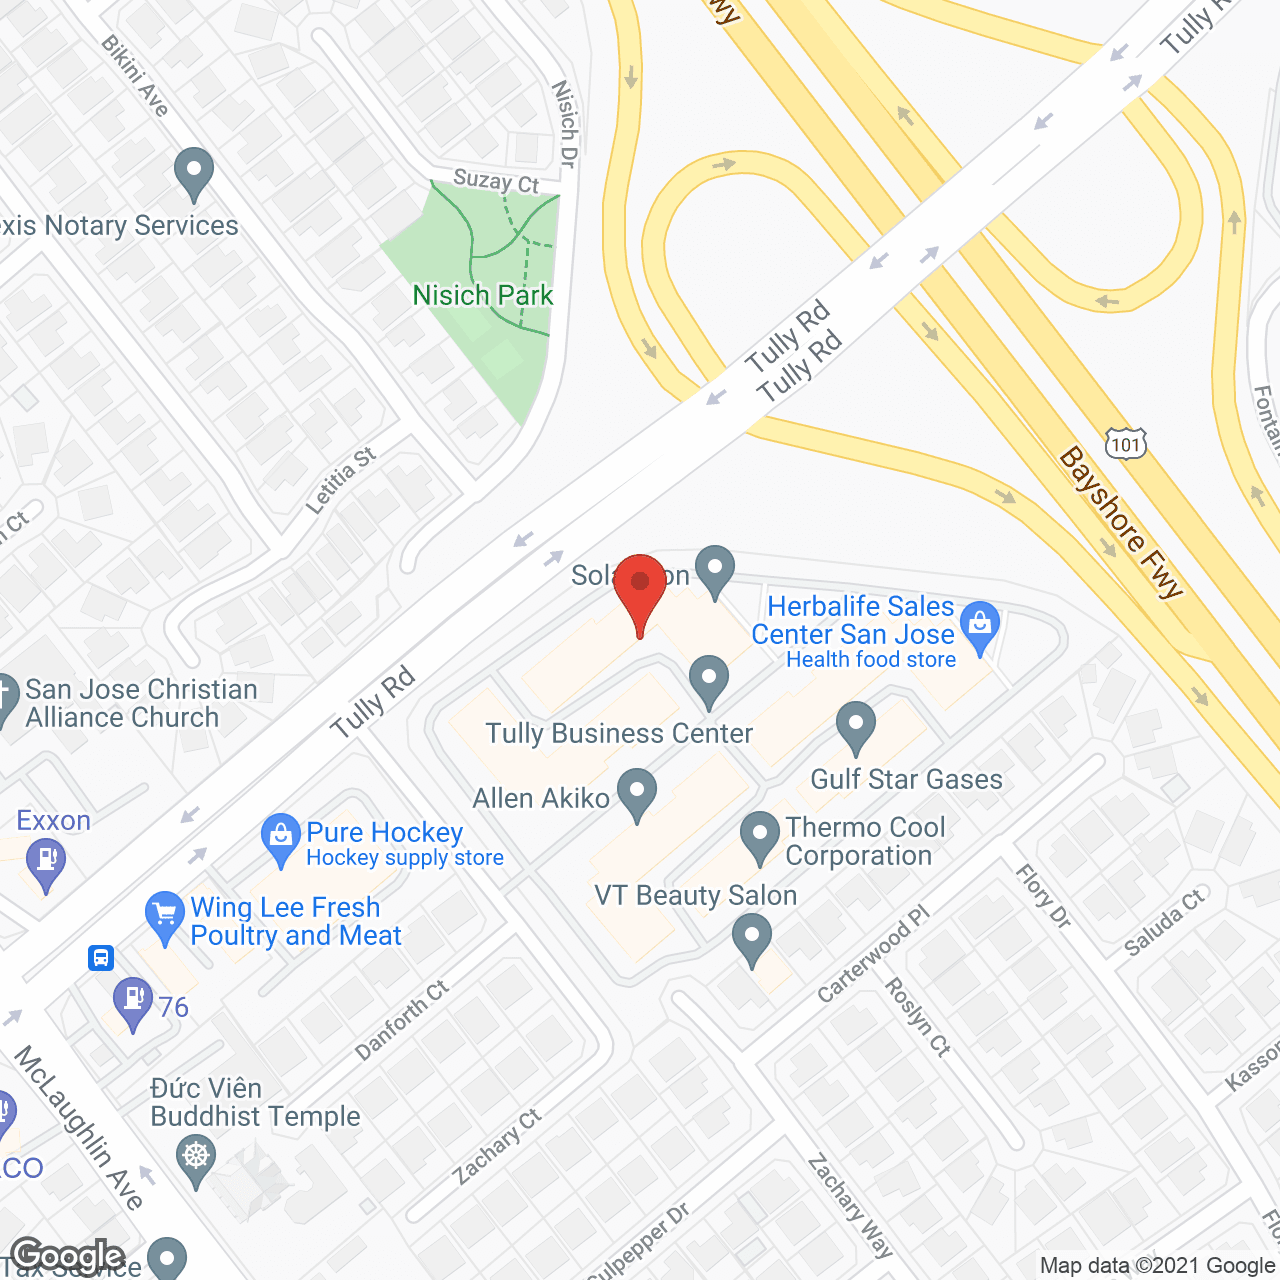 Bay Home Health Svc in google map